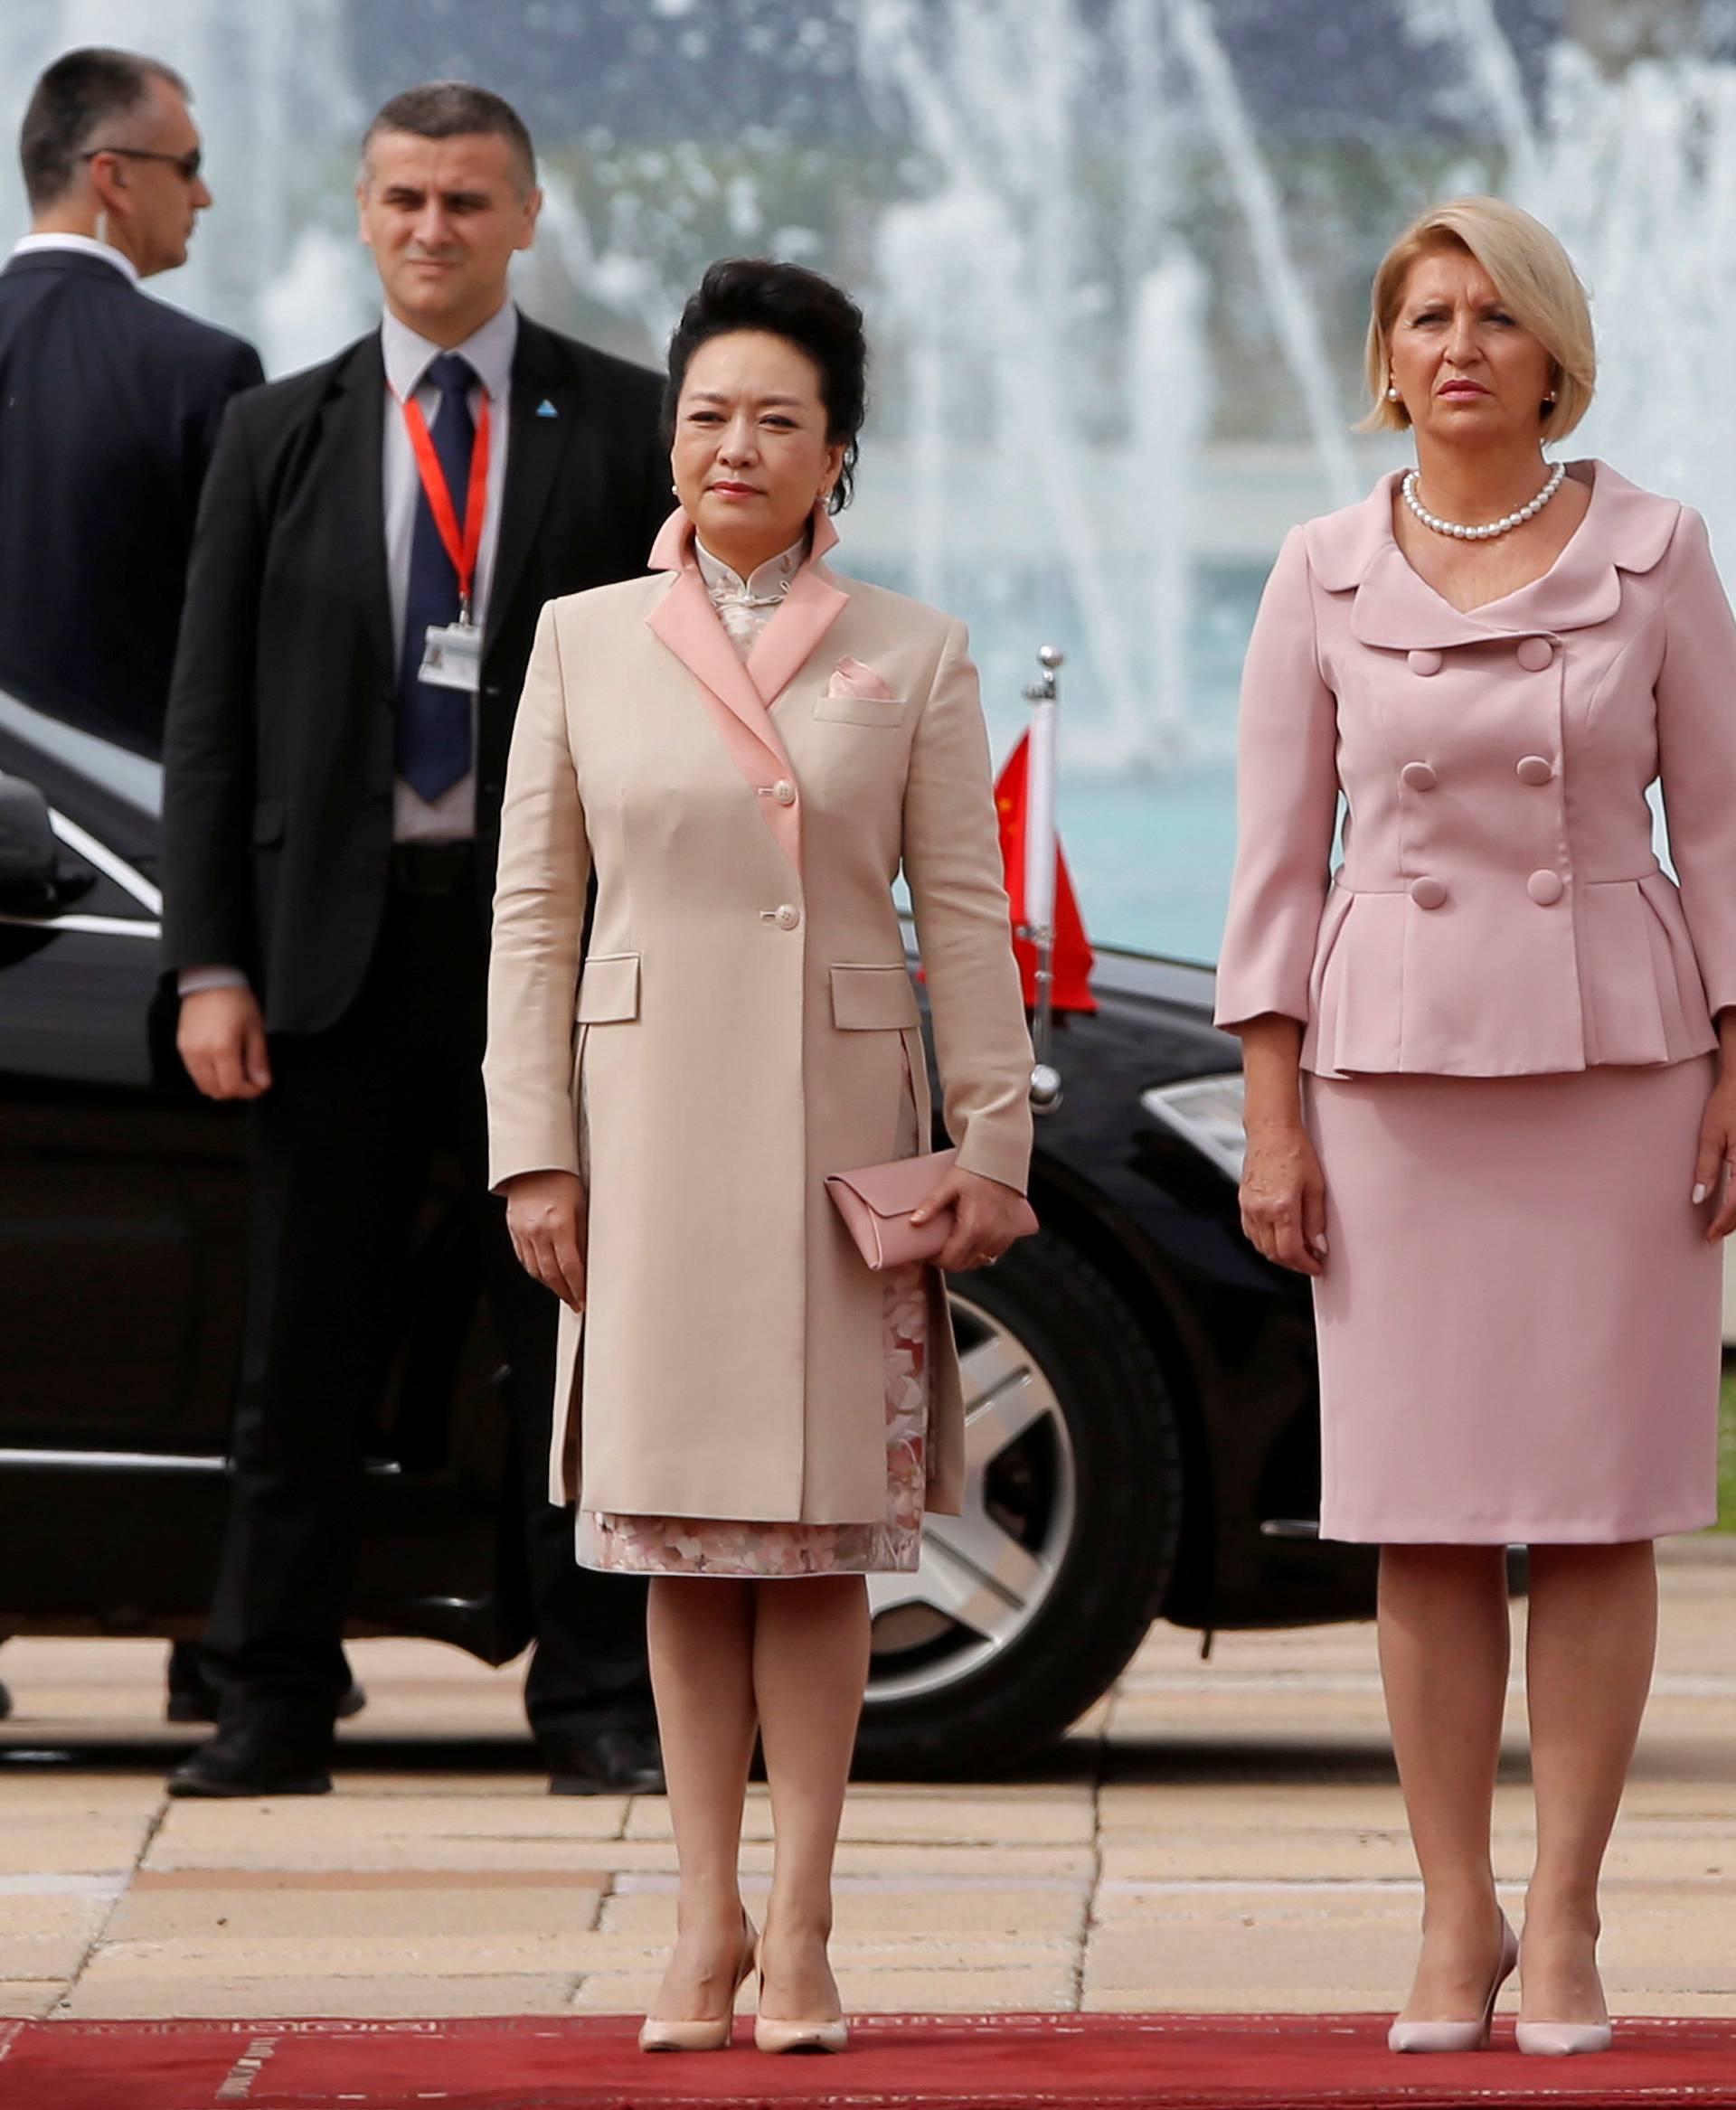 Chinese President Xi Jinping's wife Peng Liyuan (L) and Serbian President Tomislav Nikolic's wife Dragica listen to national anthems during a welcoming ceremony in Belgrade